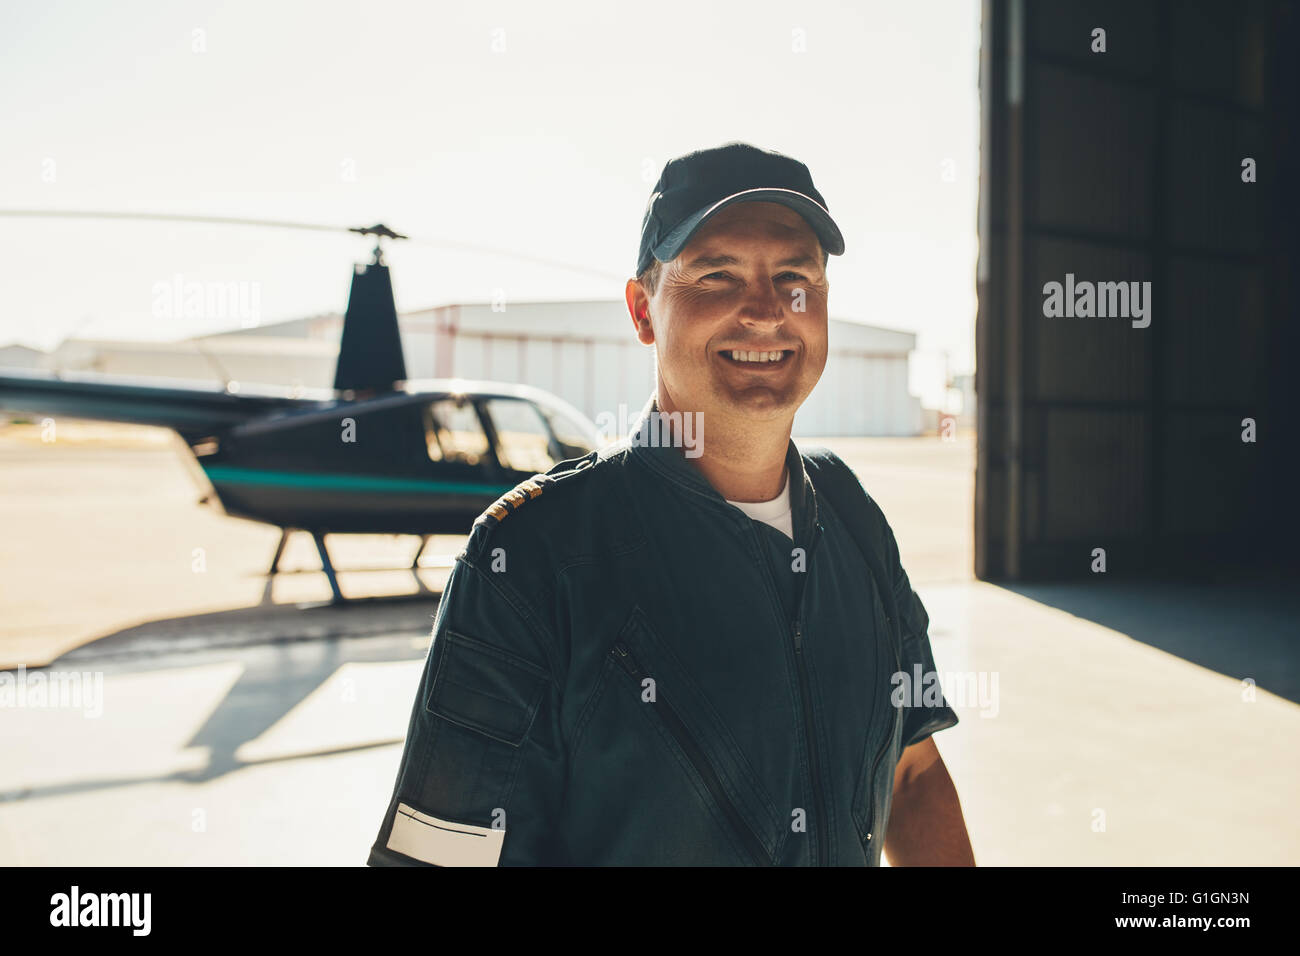 Portrait of happy male pilot standing in airplane hangar with a helicopter in background Stock Photo